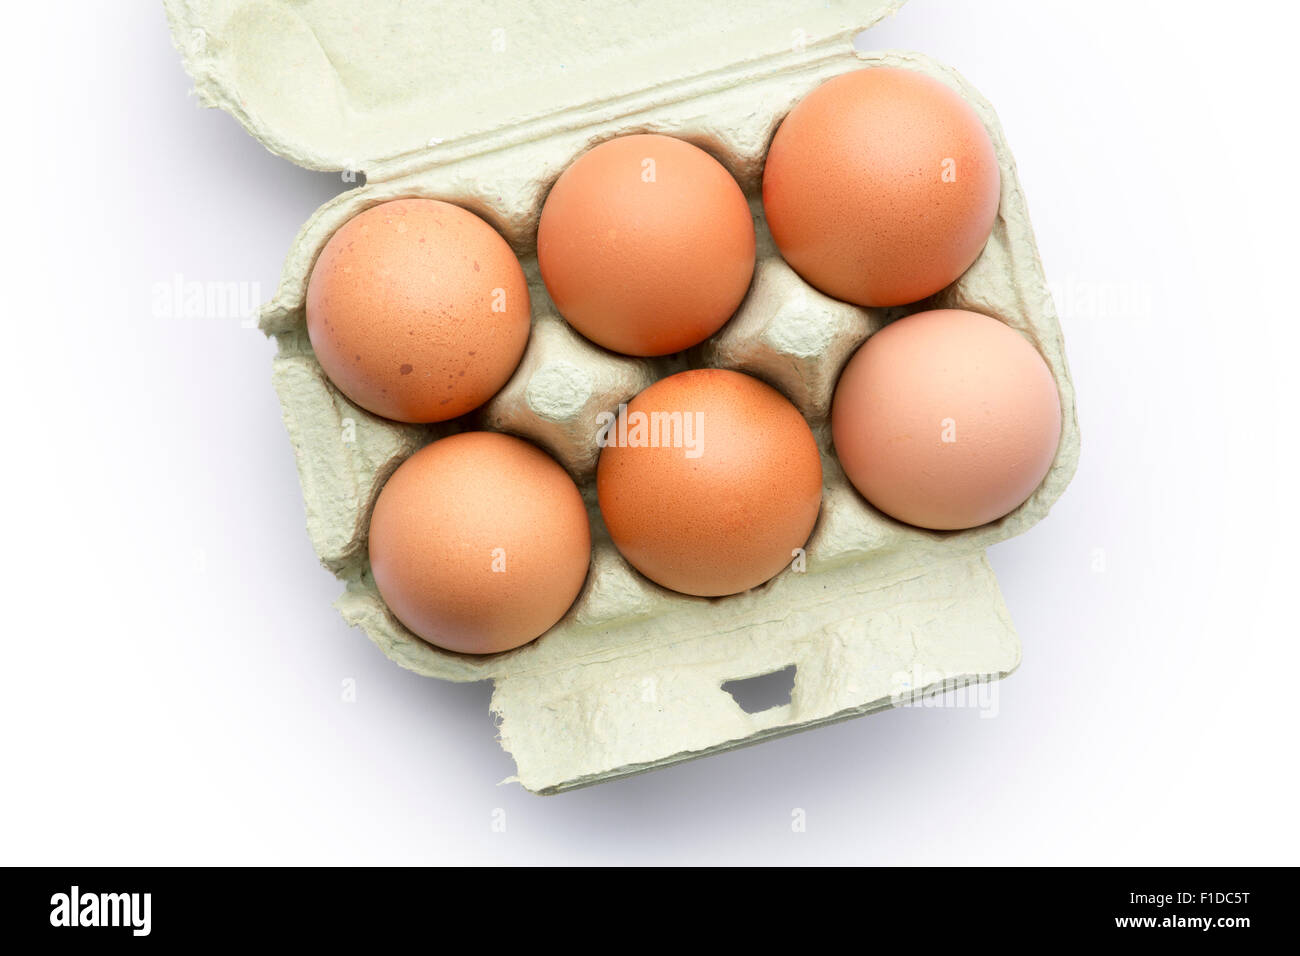 Six brown eggs in a carton isolated on a white background Stock Photo